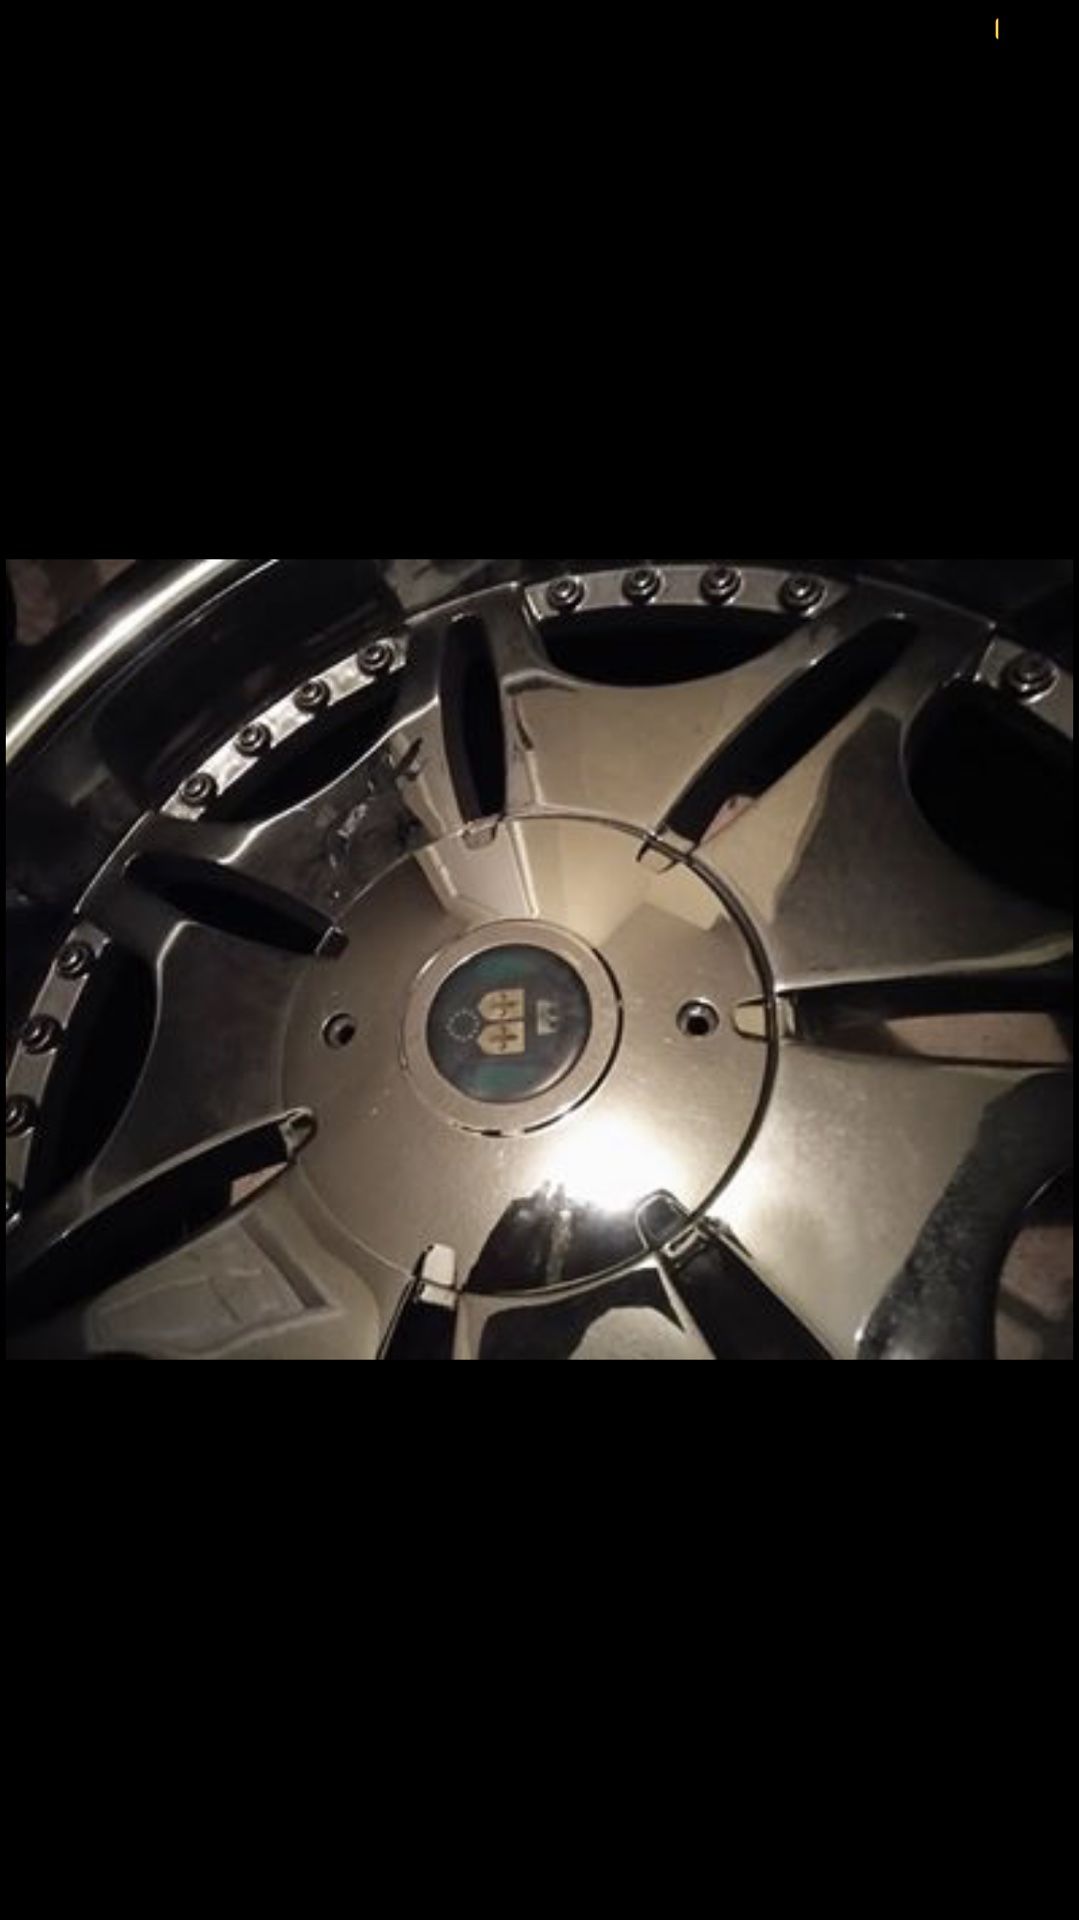 22 INCH RIMS $400 (FIRM) 